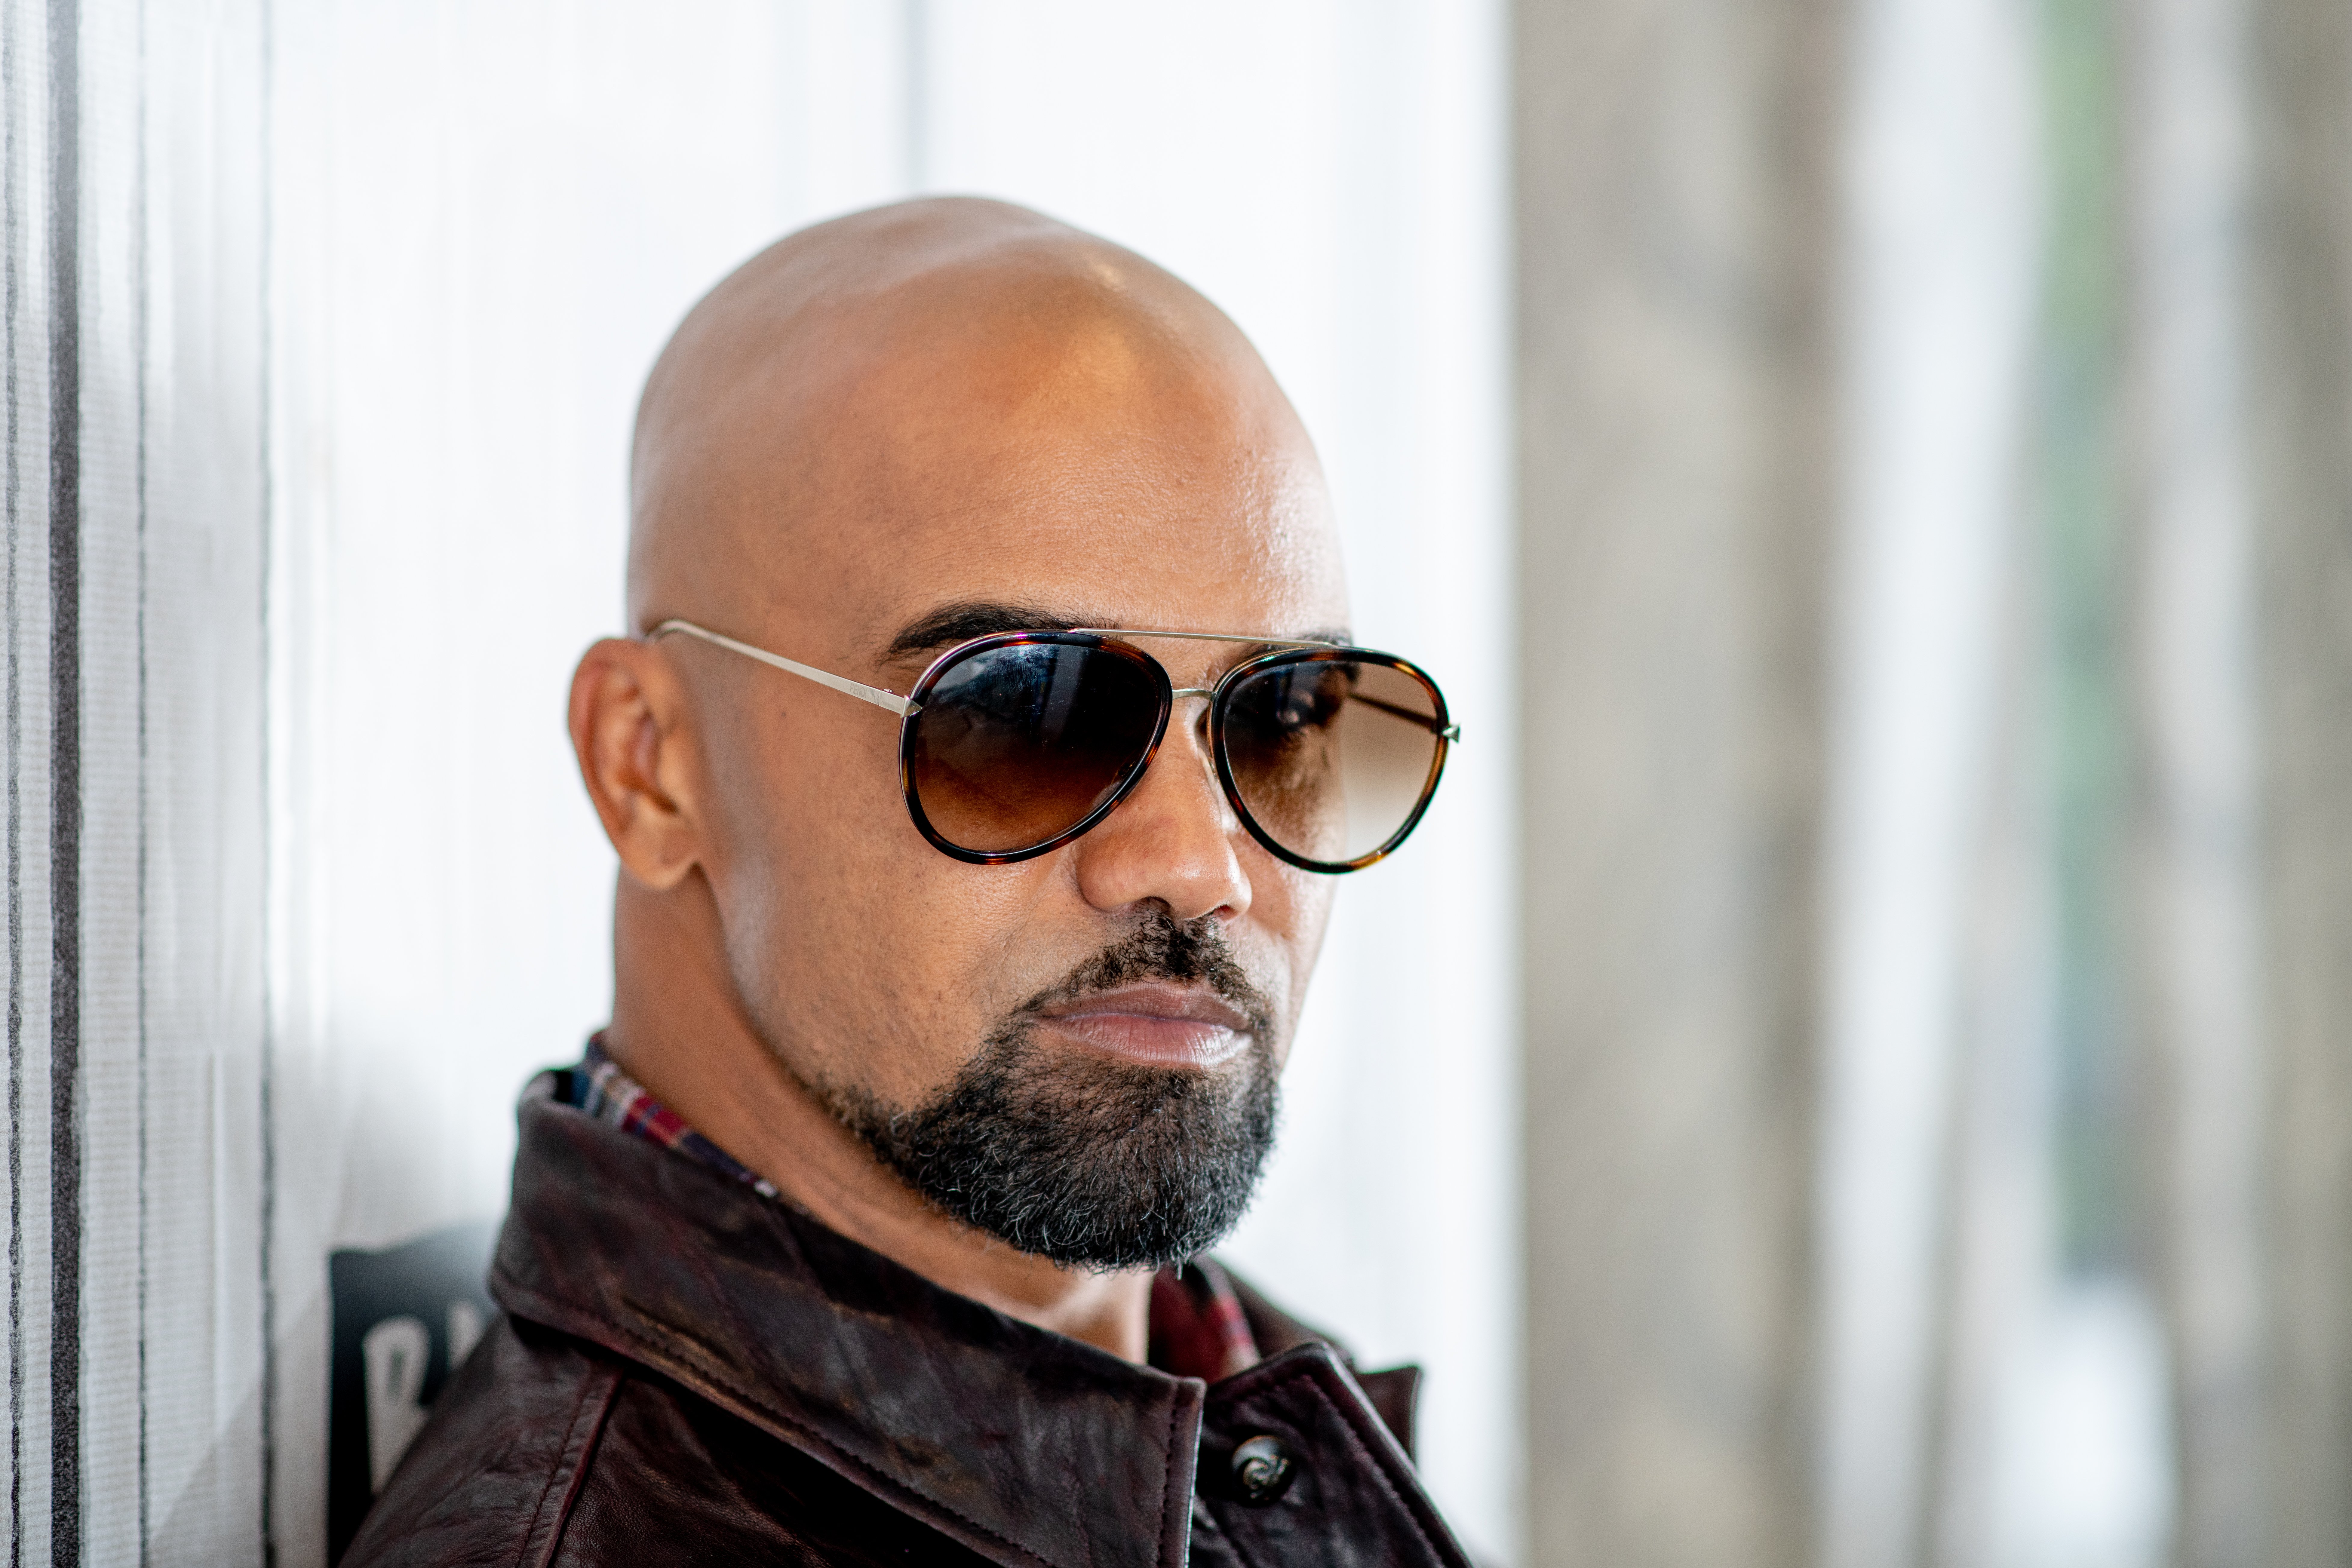 Shemar Moore discusses "S.W.A.T." with the Build Series at Build Studio on September 20, 2018  | Photo: GettyImages